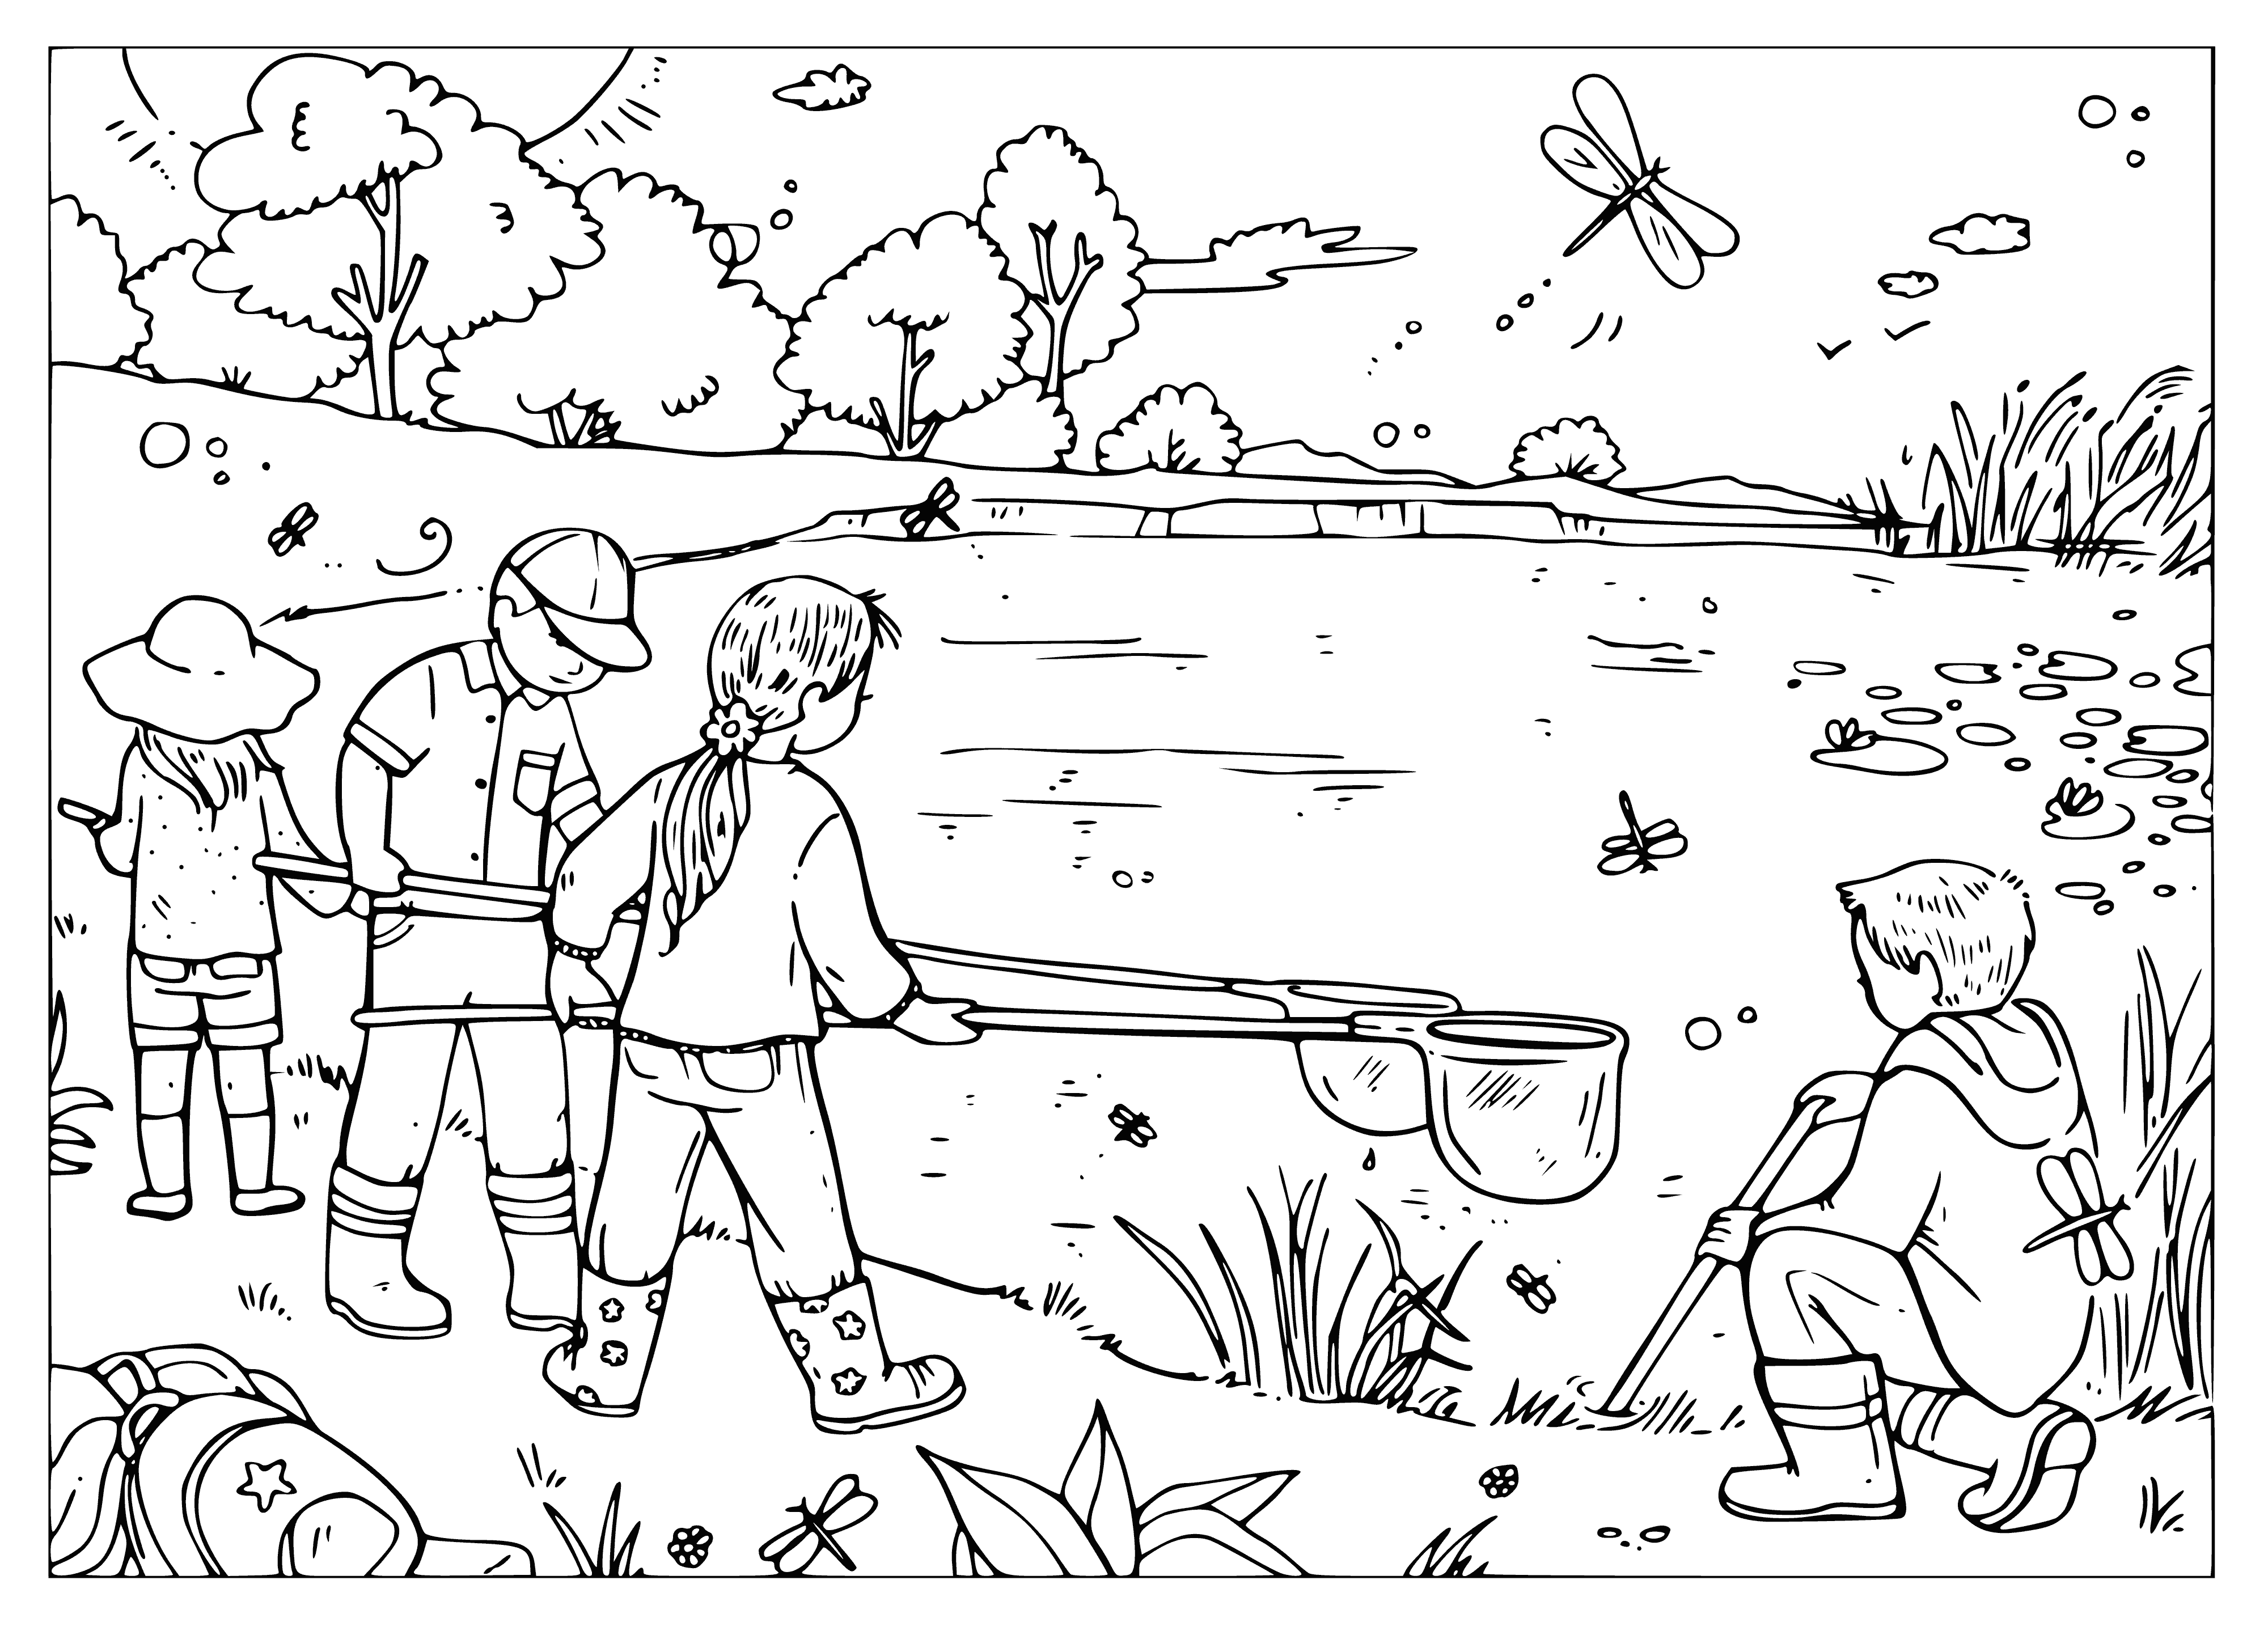 coloring page: Group of kids having fun around a lake - peace and calm. #SummerVibes